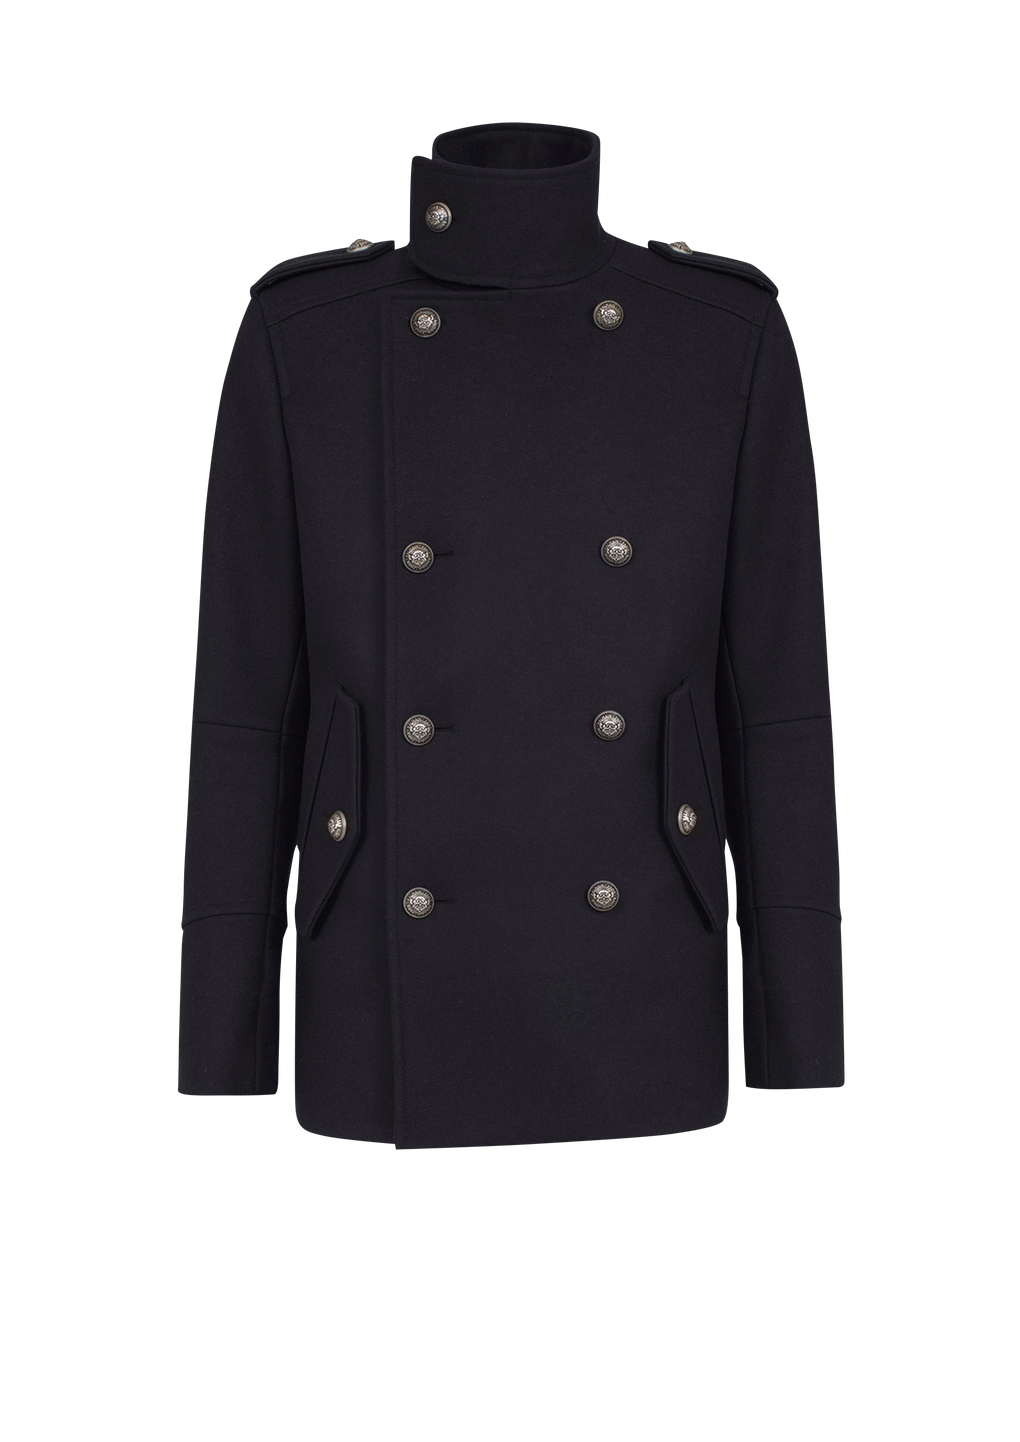 Wool military pea coat with double-breasted silver-tone buttoned fastening , black, hi-res